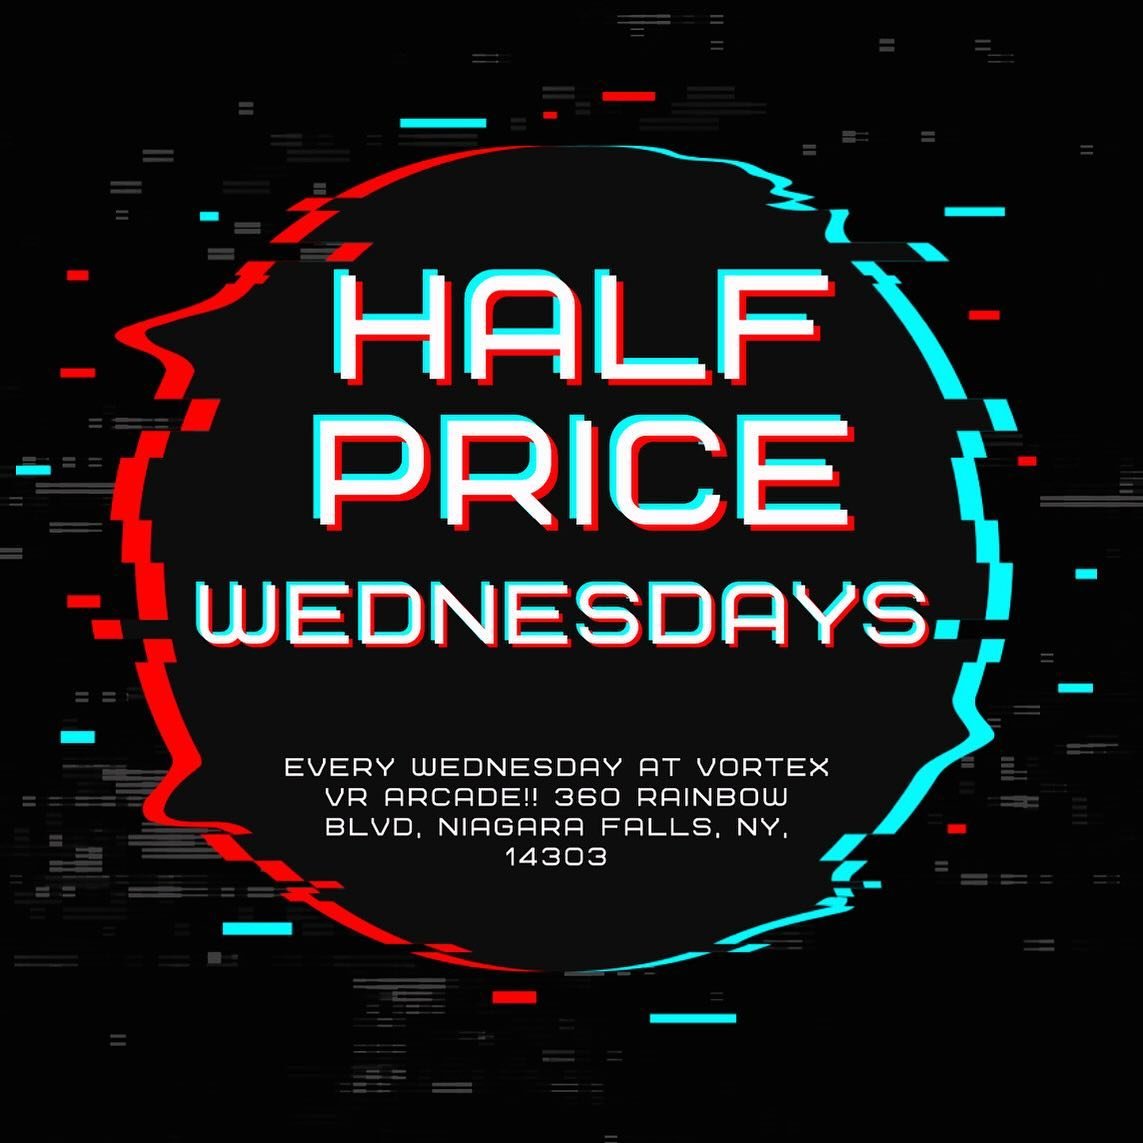 It&rsquo;s Wednesday, you know what that means!! HALF PRICE GAME CARDS! We are open for 3-9pm, stop by today to enjoy this awesome deal‼️
-
-
-

#arcade #arcadegames #videogames #retrogaming #retro #gaming #retrogames #nintendo #gamer #games #s #sega